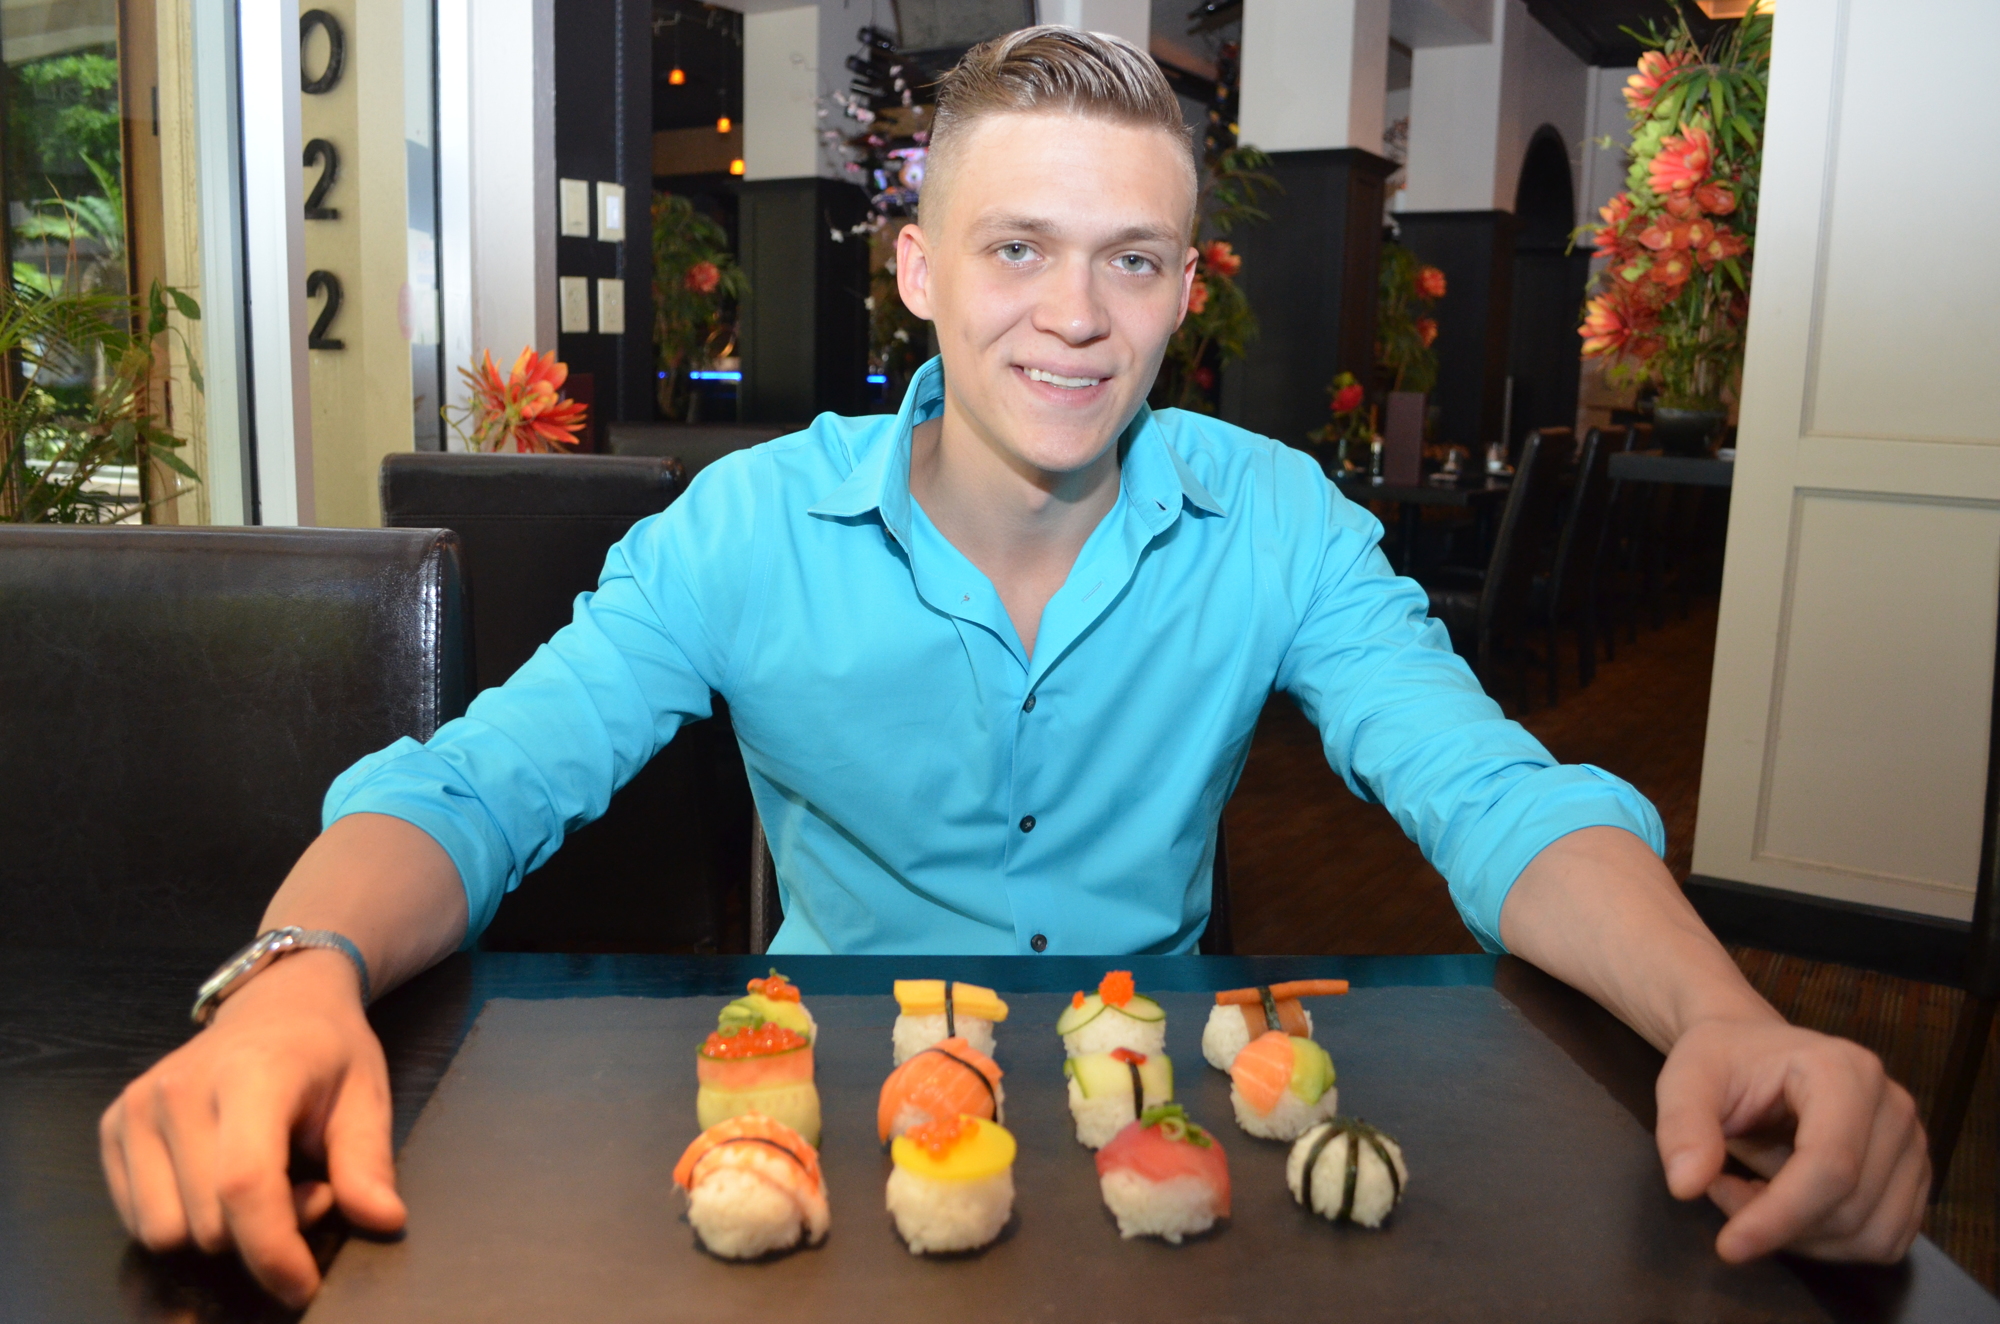 Sam Ray, co-owner of Tsunami Sushi, with the colorful sushi created for the Art of Food Festival inspired by the Sarasota Opera